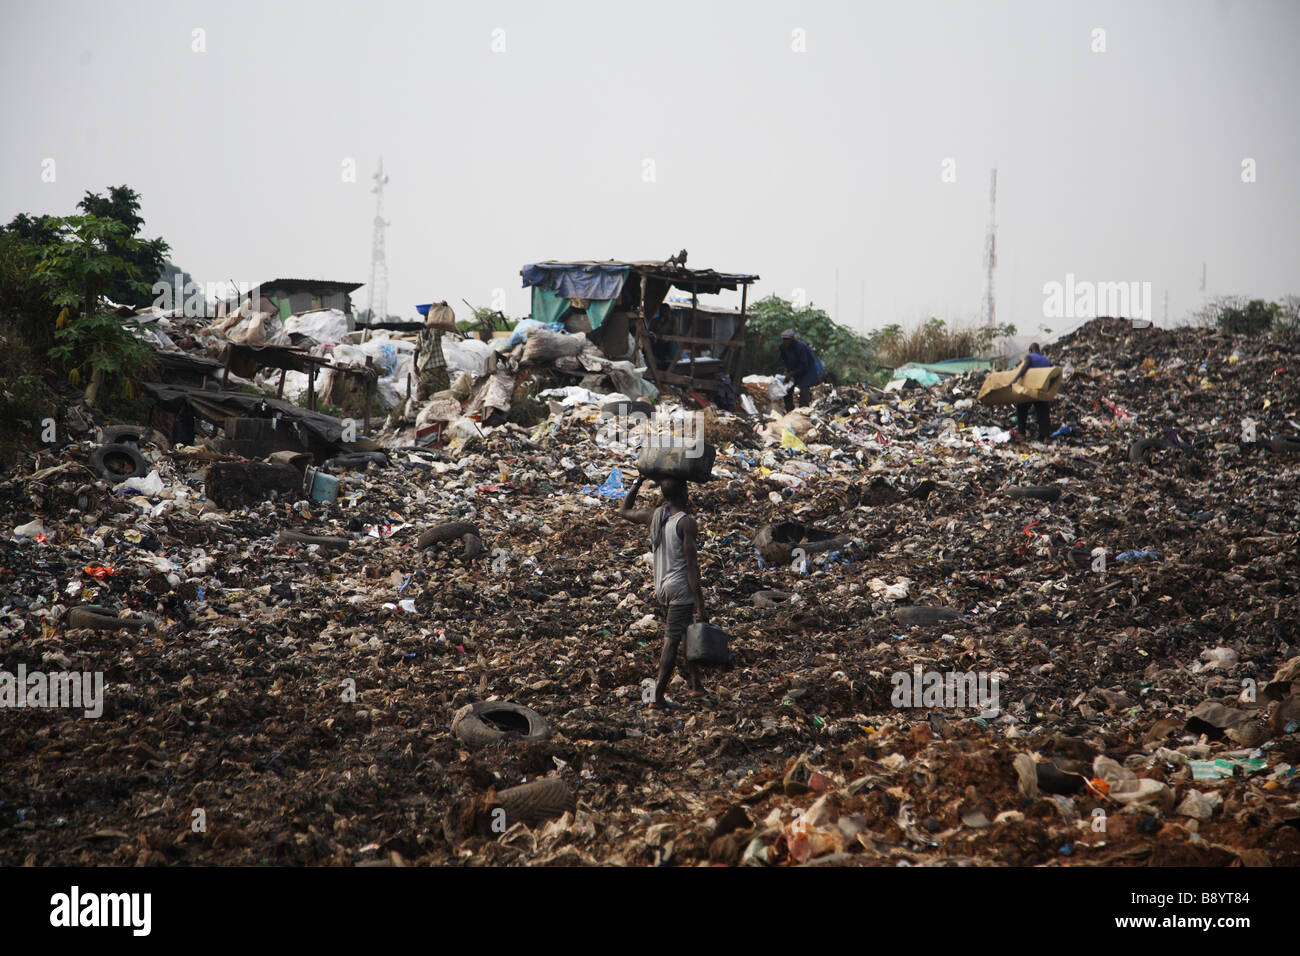 Olusosum municipal dump site where human scavengers try to make a living out of sifting through the rubbish. Stock Photo